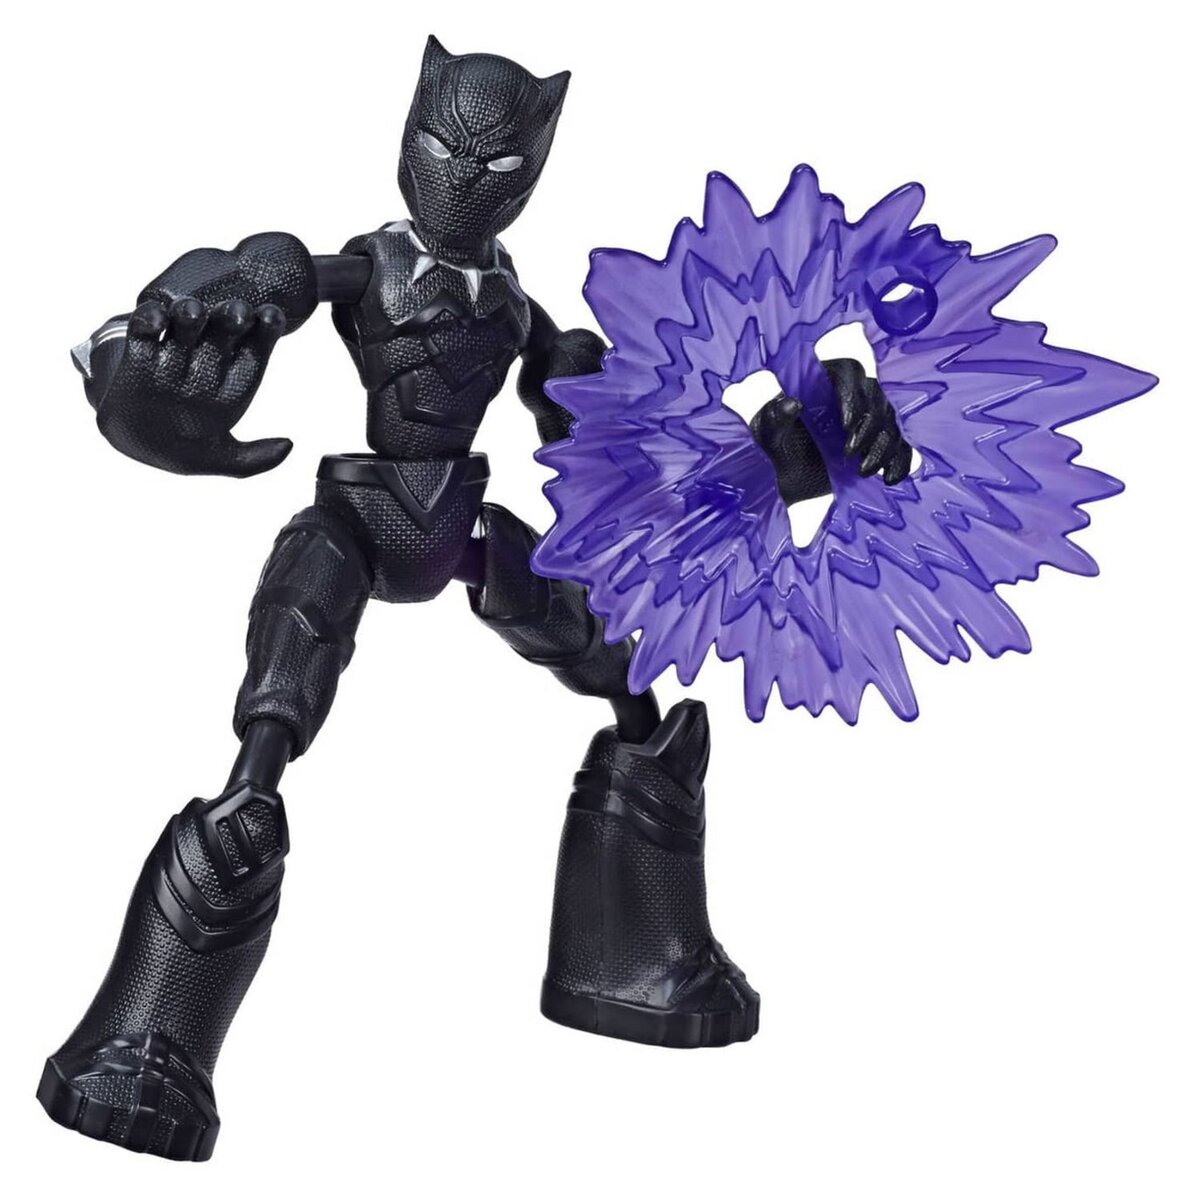 HASBRO Figurines Bend and Flex - Avengers - Black Panther